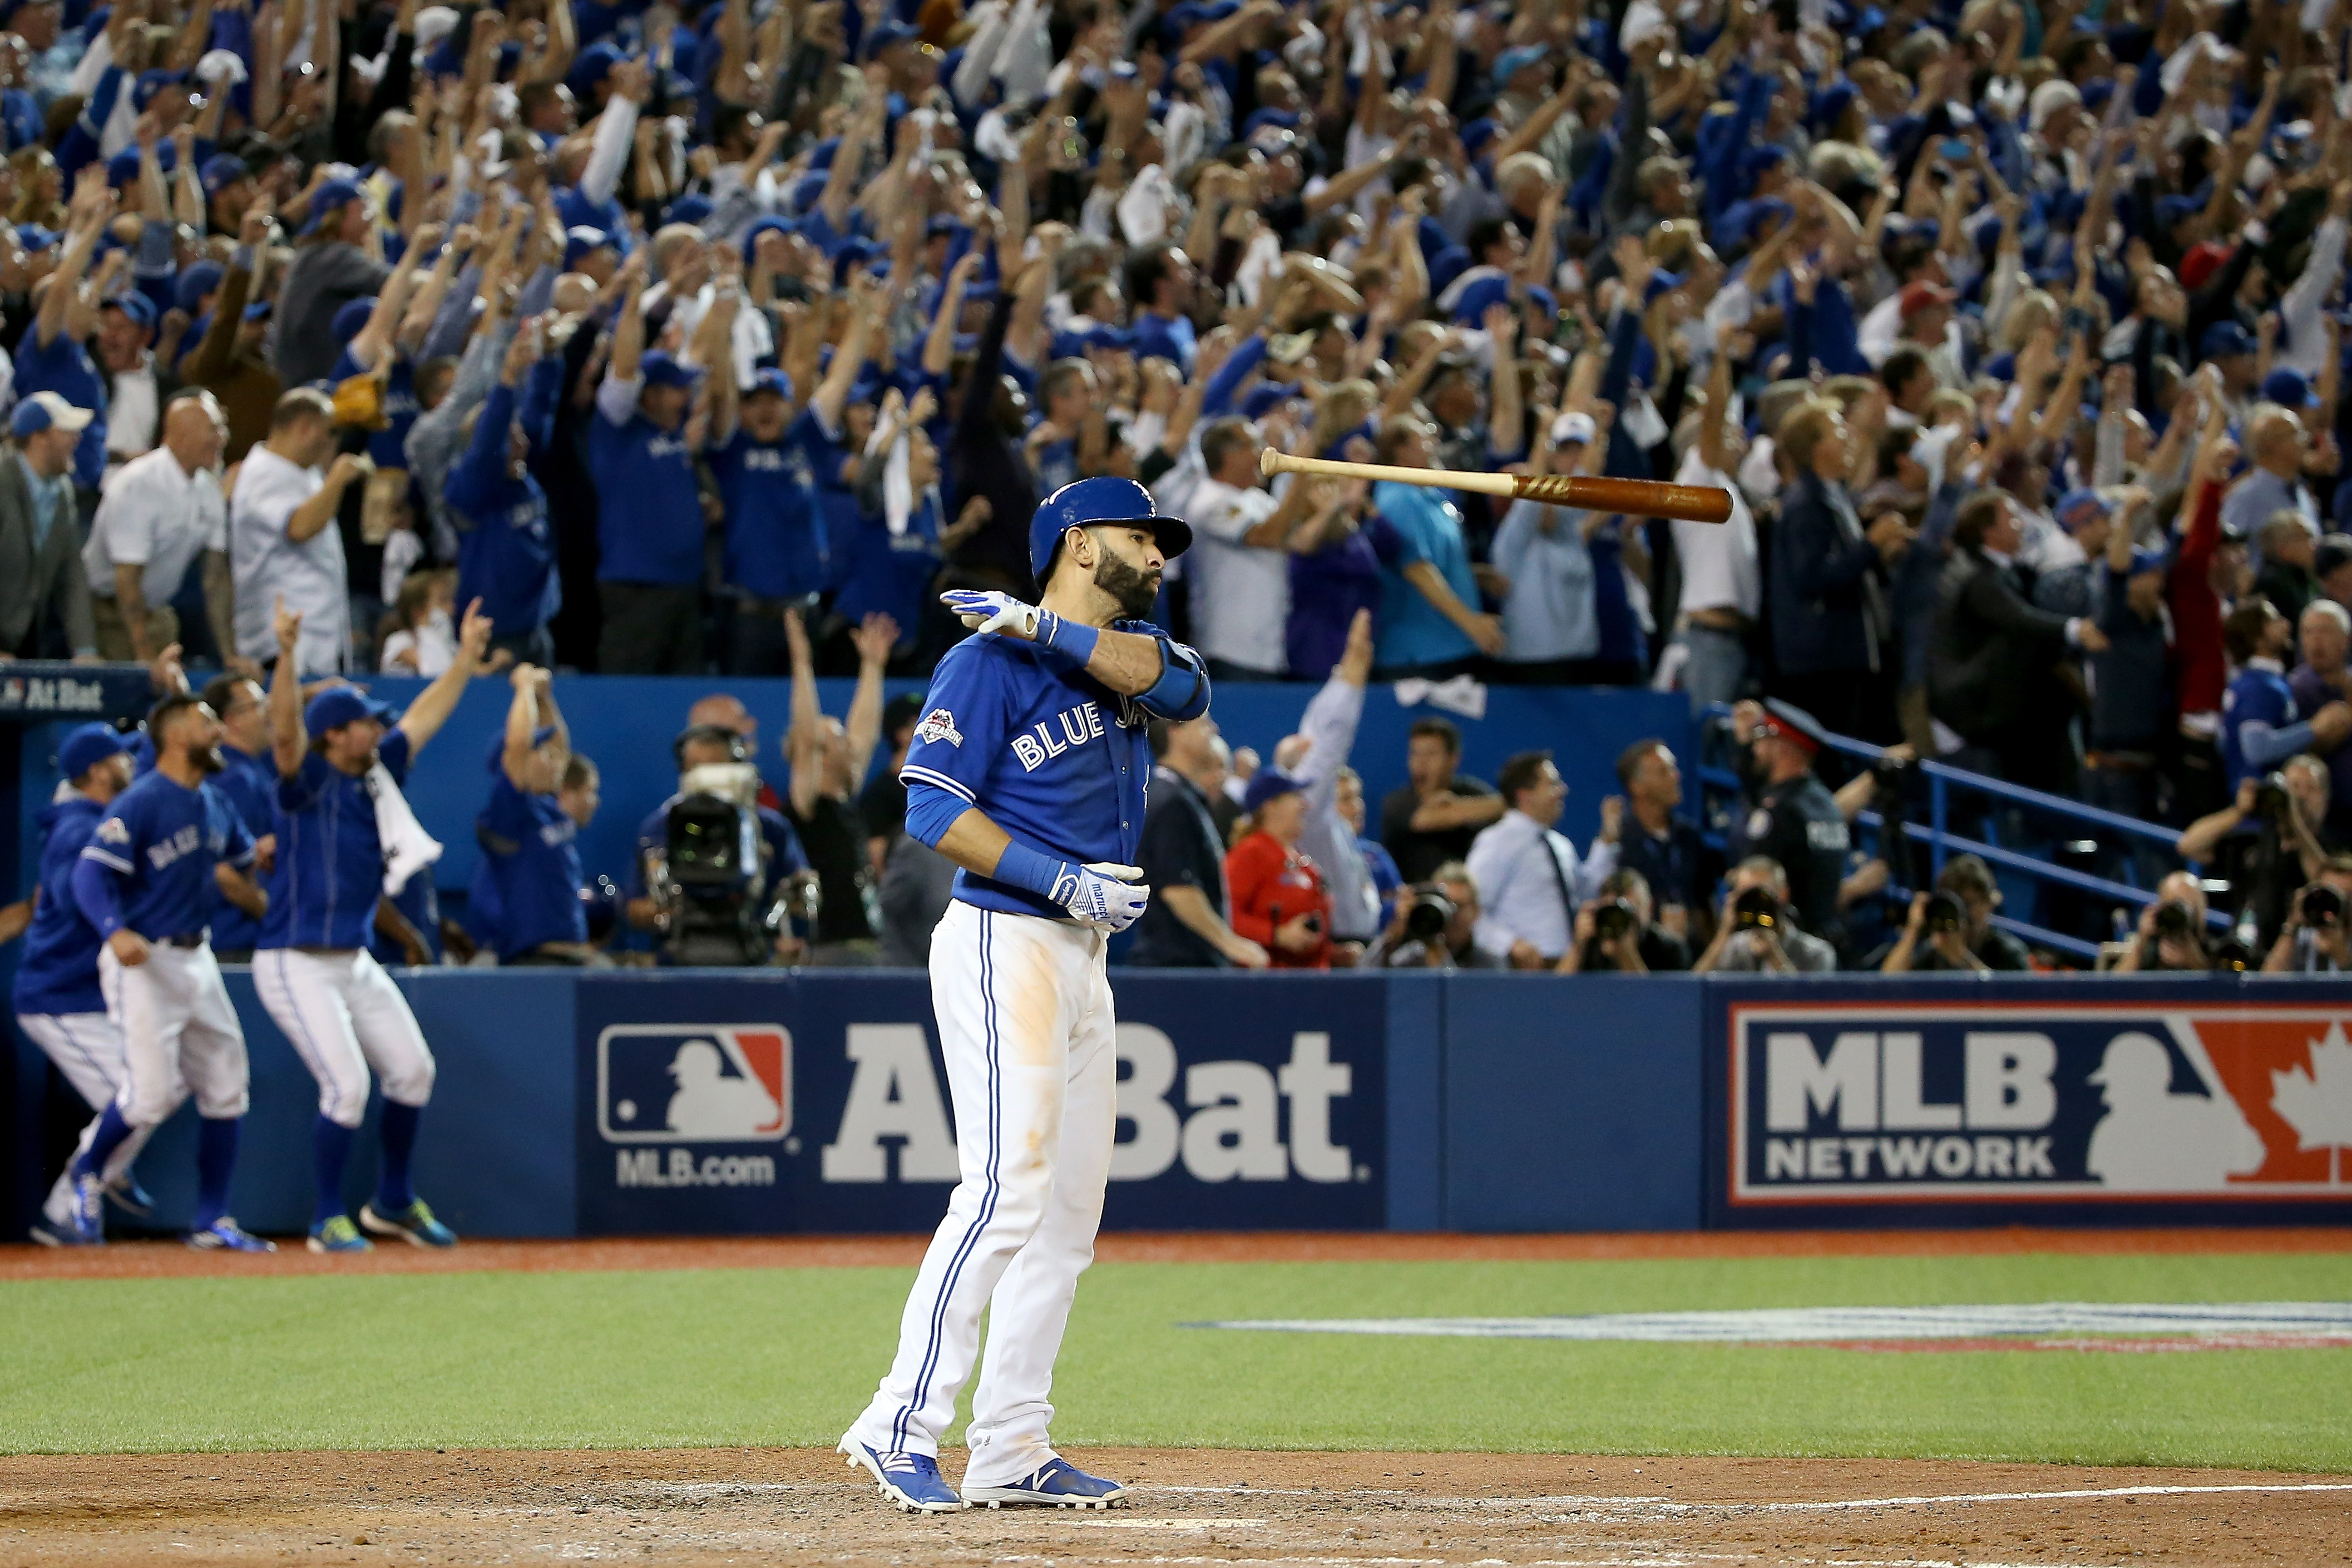 Jose Bautista of the Toronto Blue Jays flips his bat up in the air after he hits a three-run home run in the seventh inning against the Texas Rangers in game five of the American League Division Series at Rogers Centre on October 14, 2015 in Toronto, Canada. (Getty Images—2015 Getty Images)